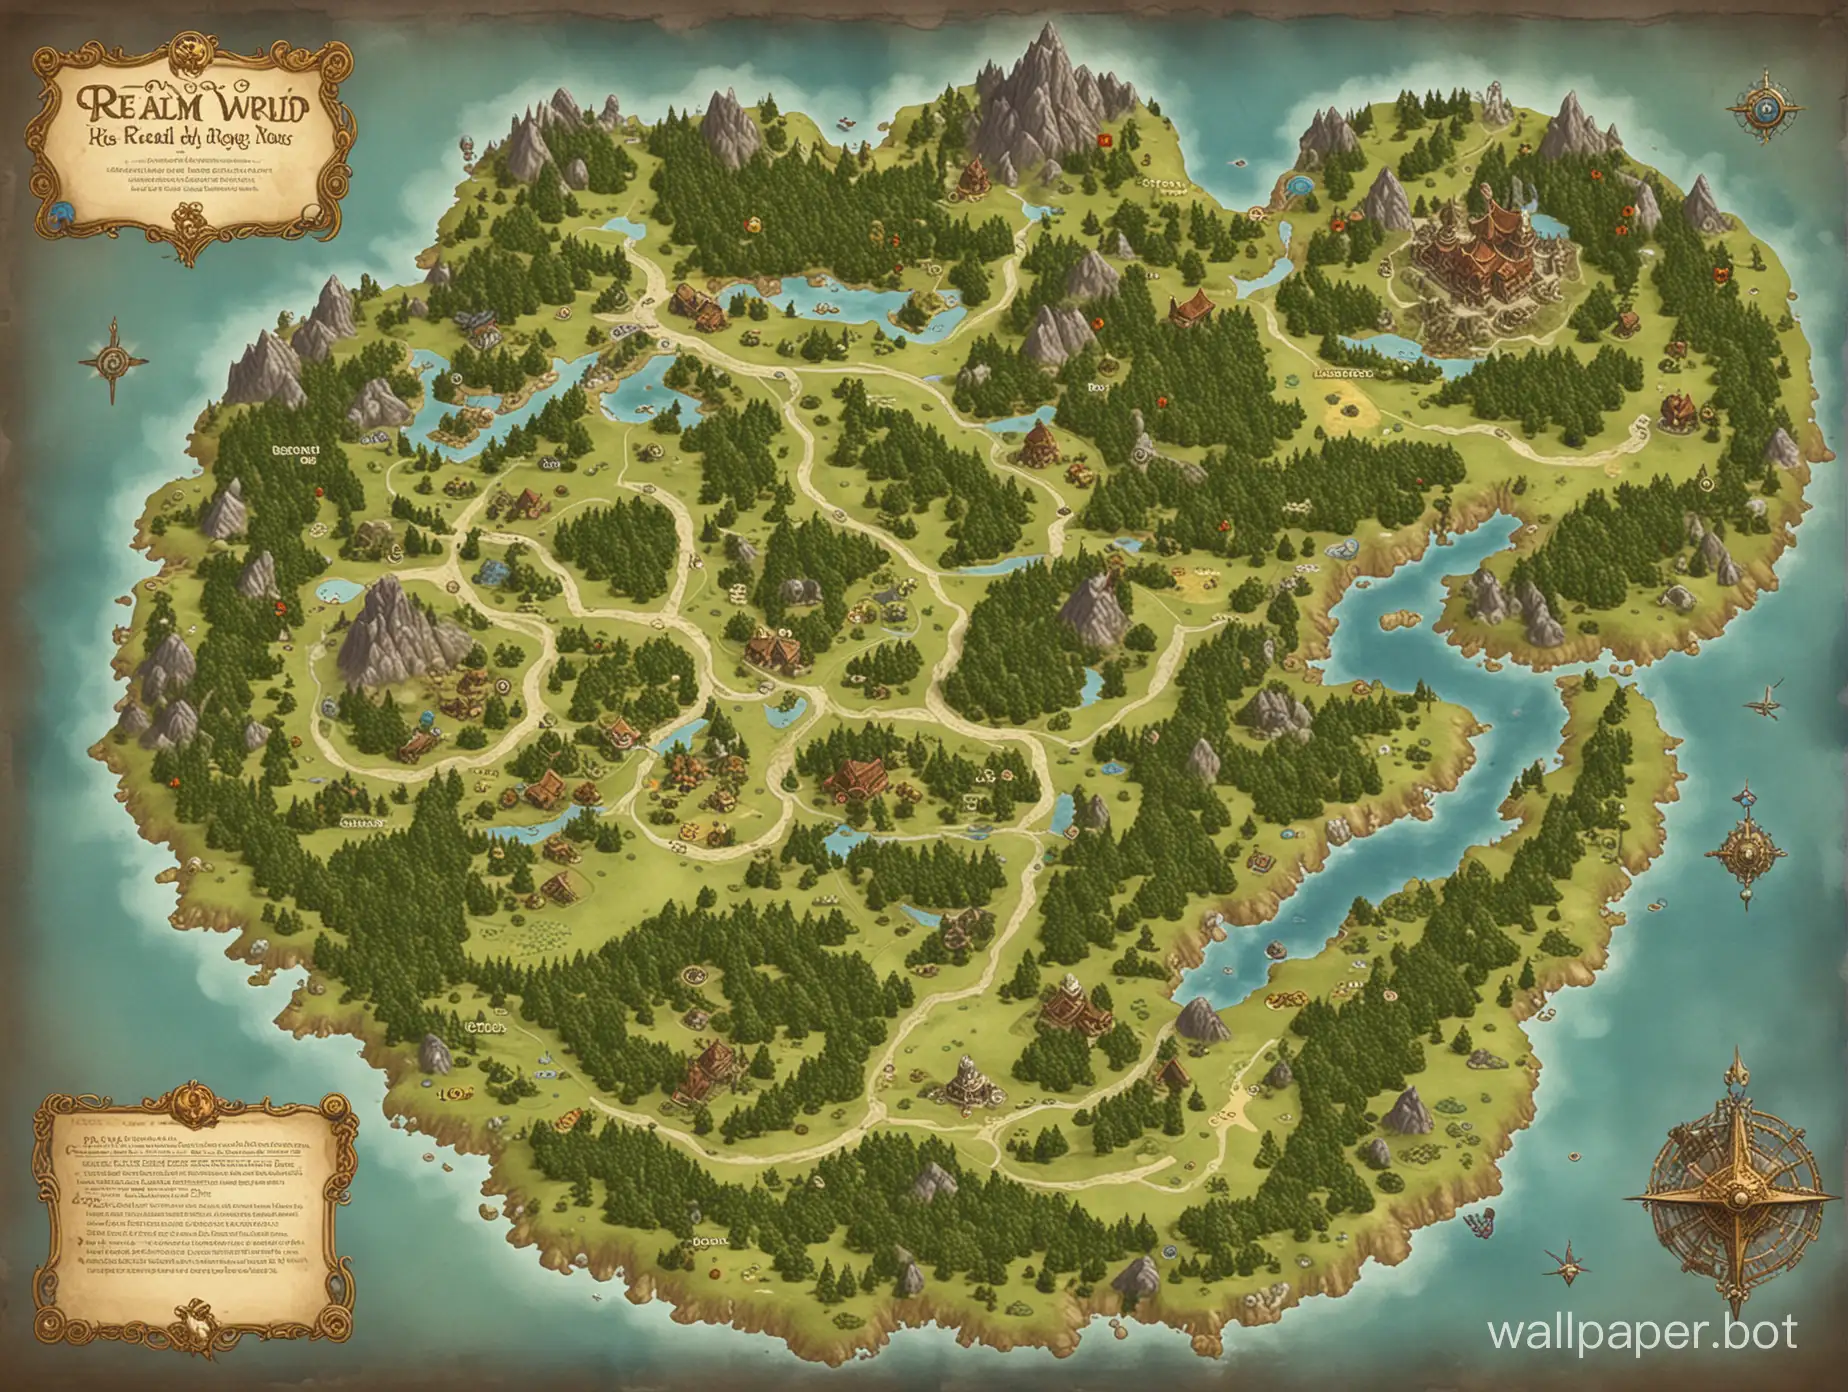 Realm World, Fantasy Map maker, Wild Realms, Map in a Wonderful New World, Incarnate Maps, Incarnate Maps, Incarnate Fantasy Maps, Incarnate World Map